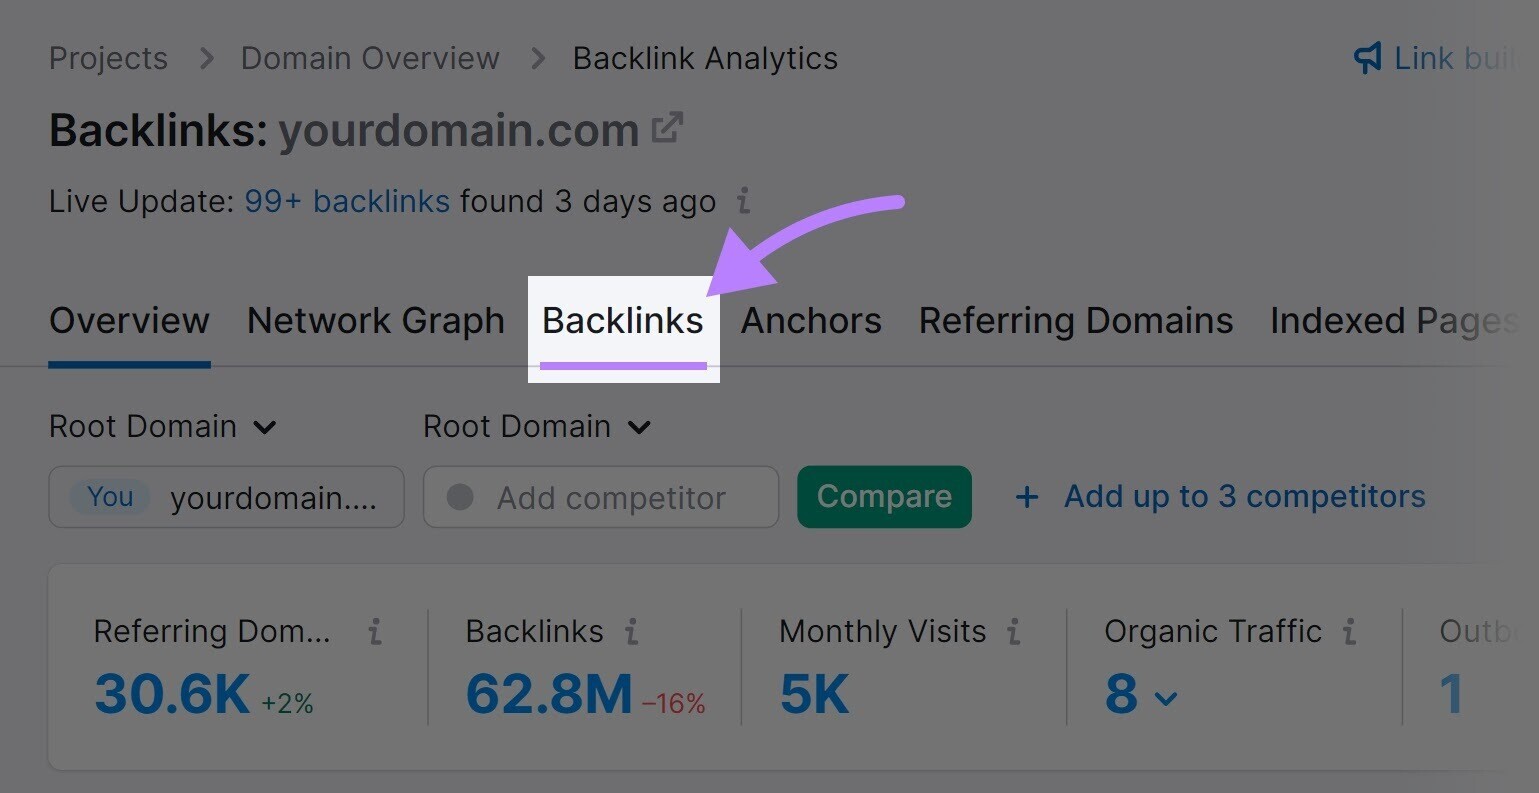 “Backlinks” button highlighted on the main dashboard